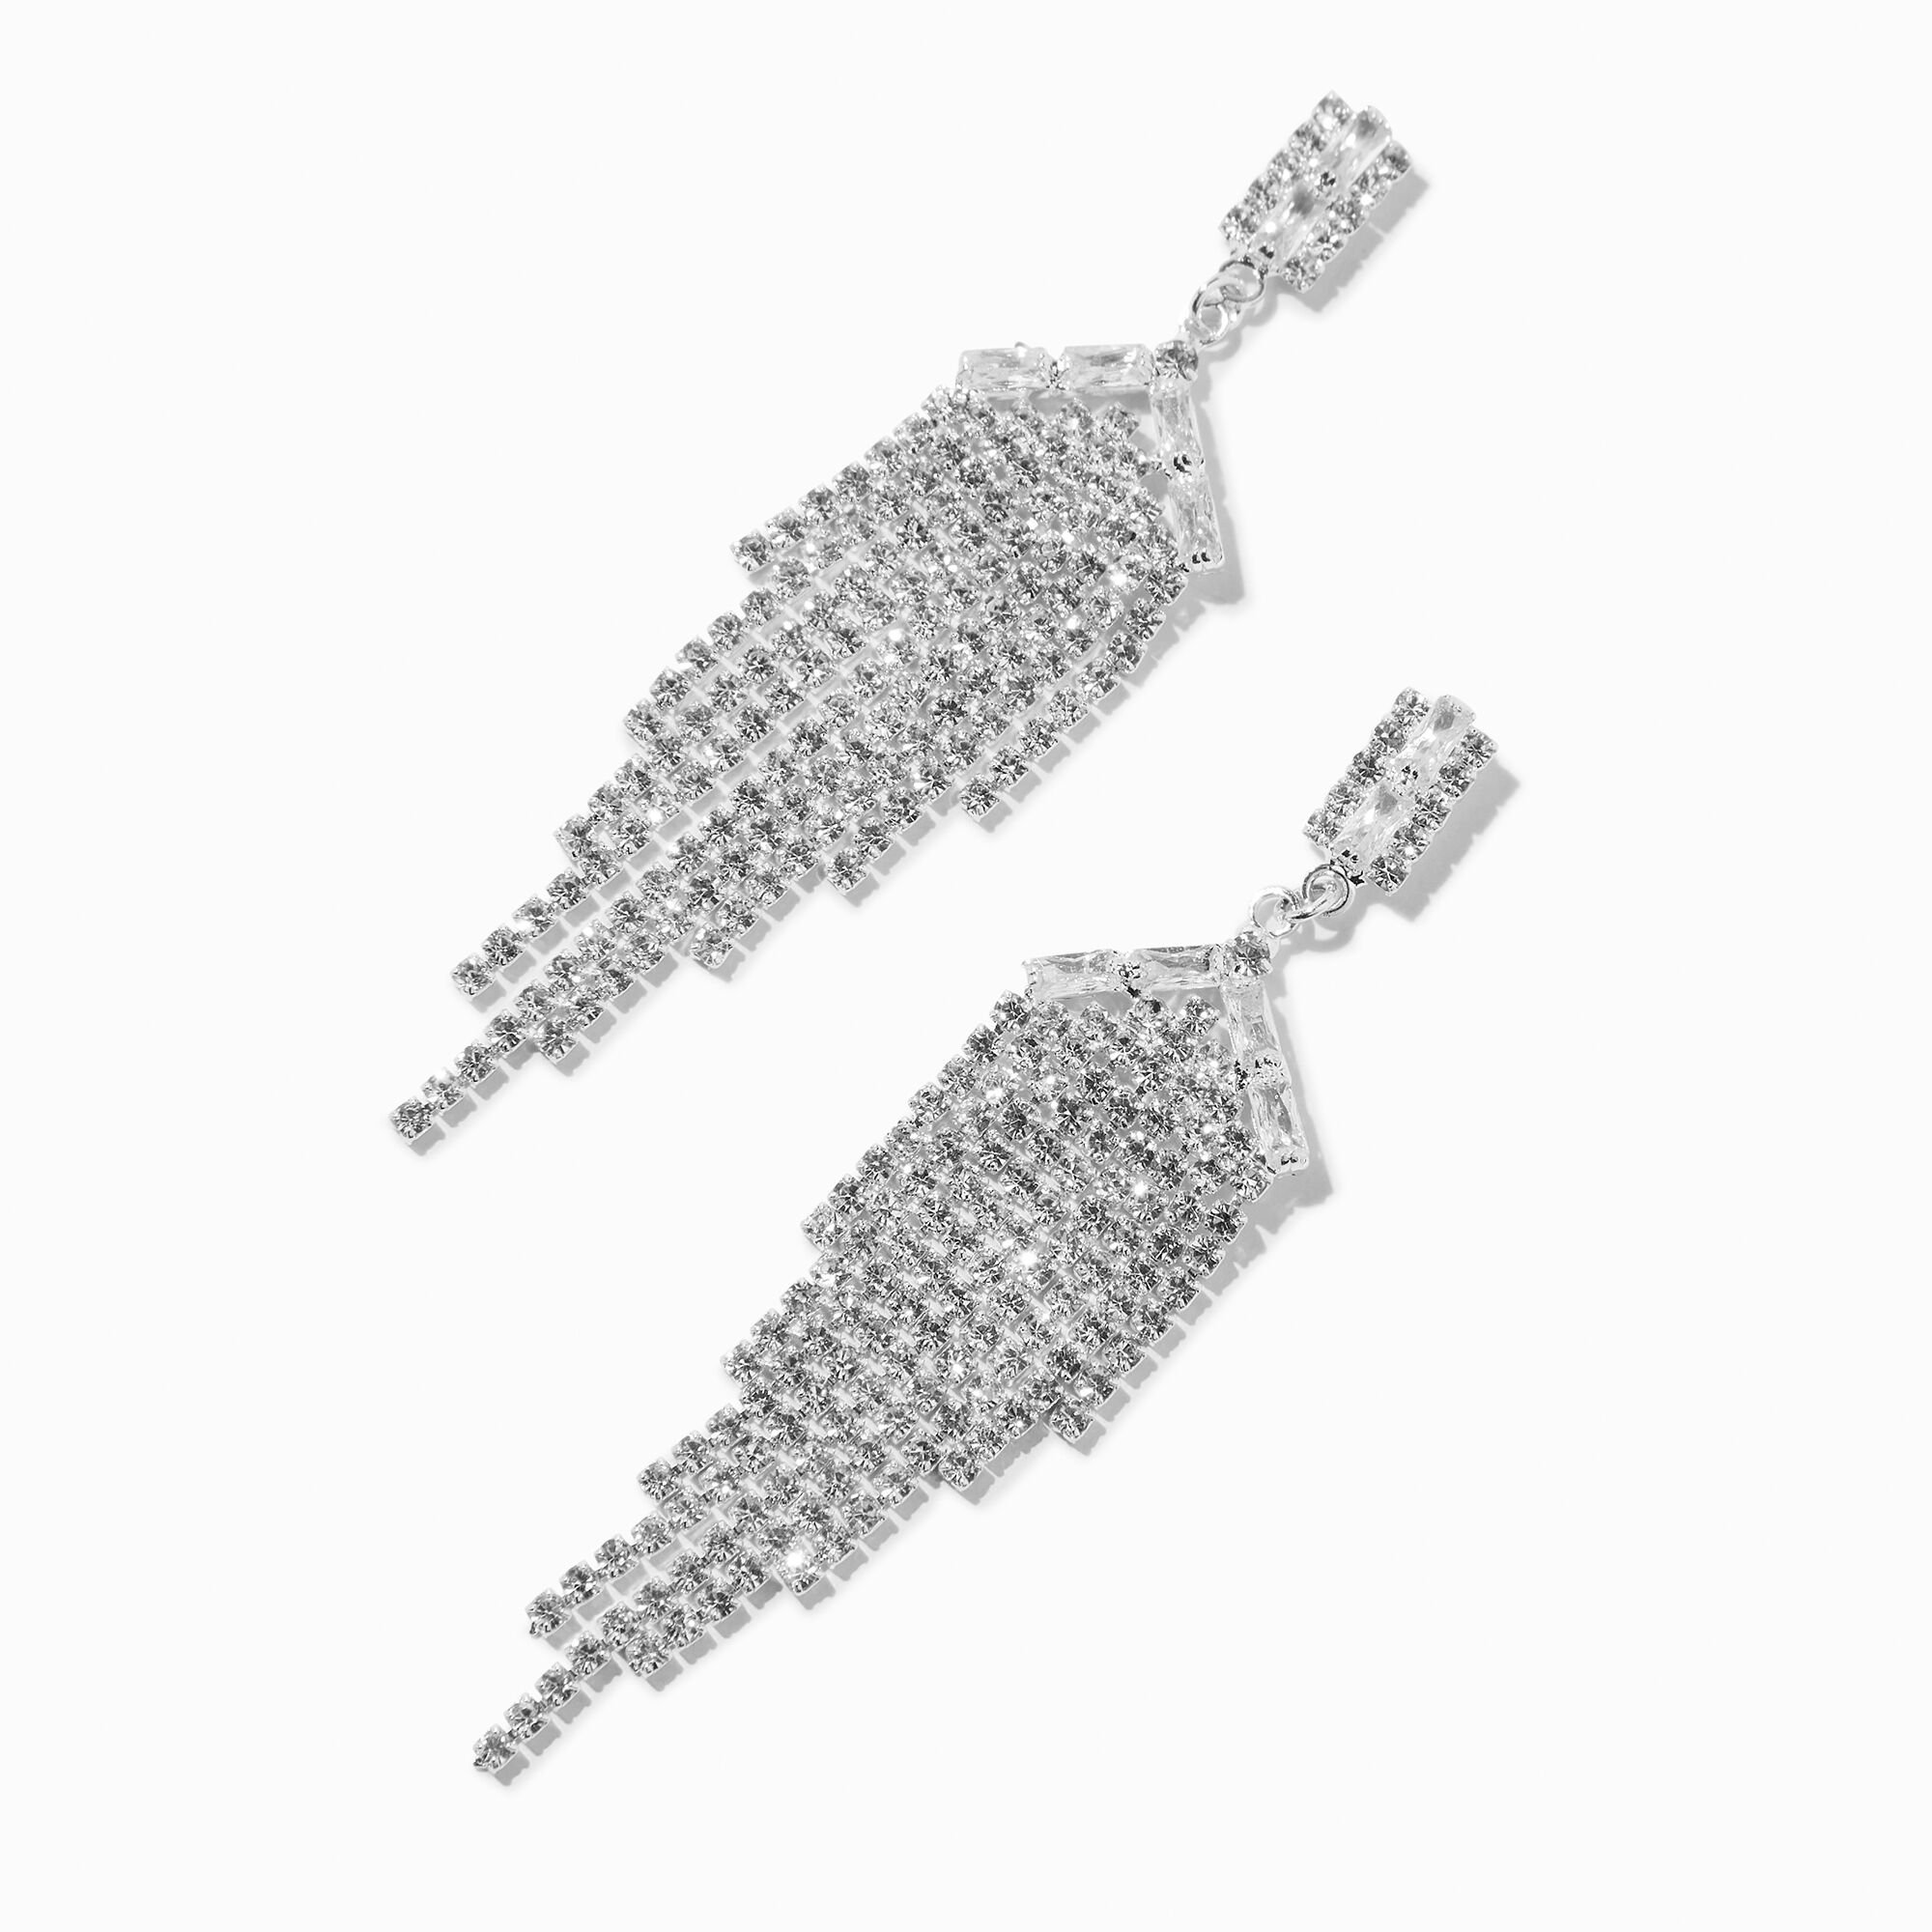 View Claires Tone Rhinestone 25 Chandelier Drop Earrings Silver information